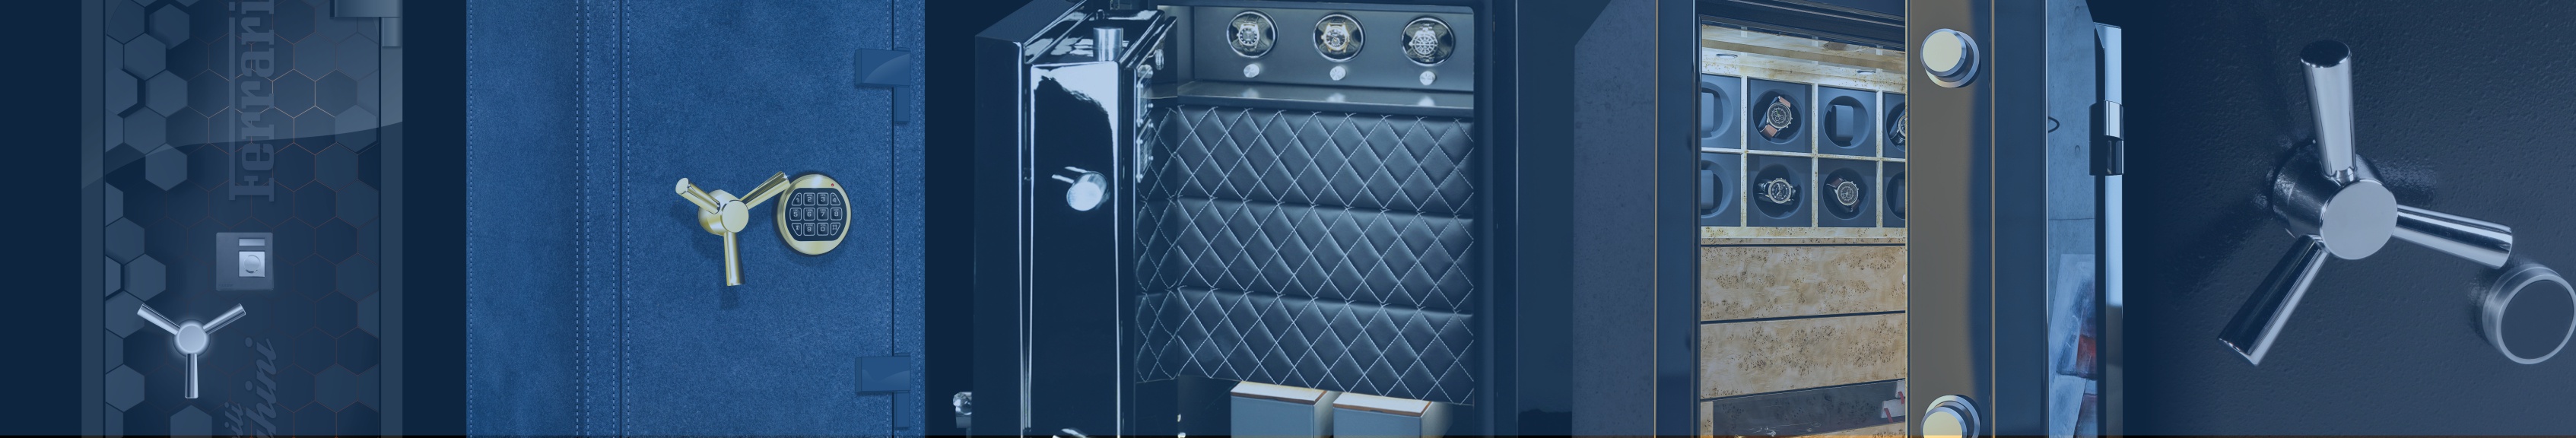 Luxury Designer Safes, Protection With Style!